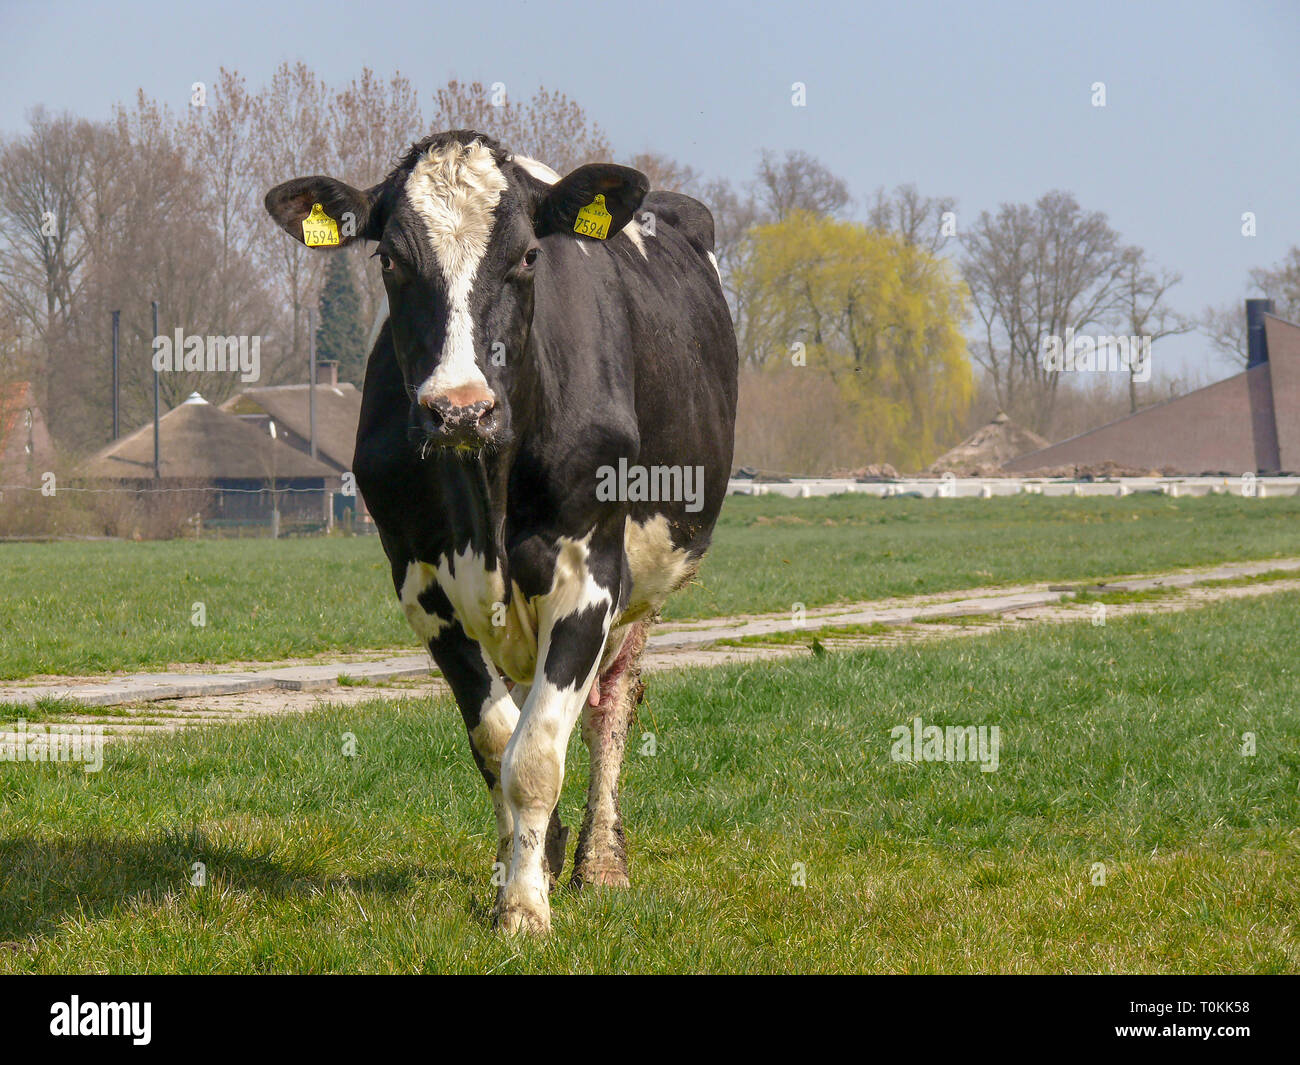 Young black and white cow walking in pasture with a farm and haystack in the background. Stock Photo